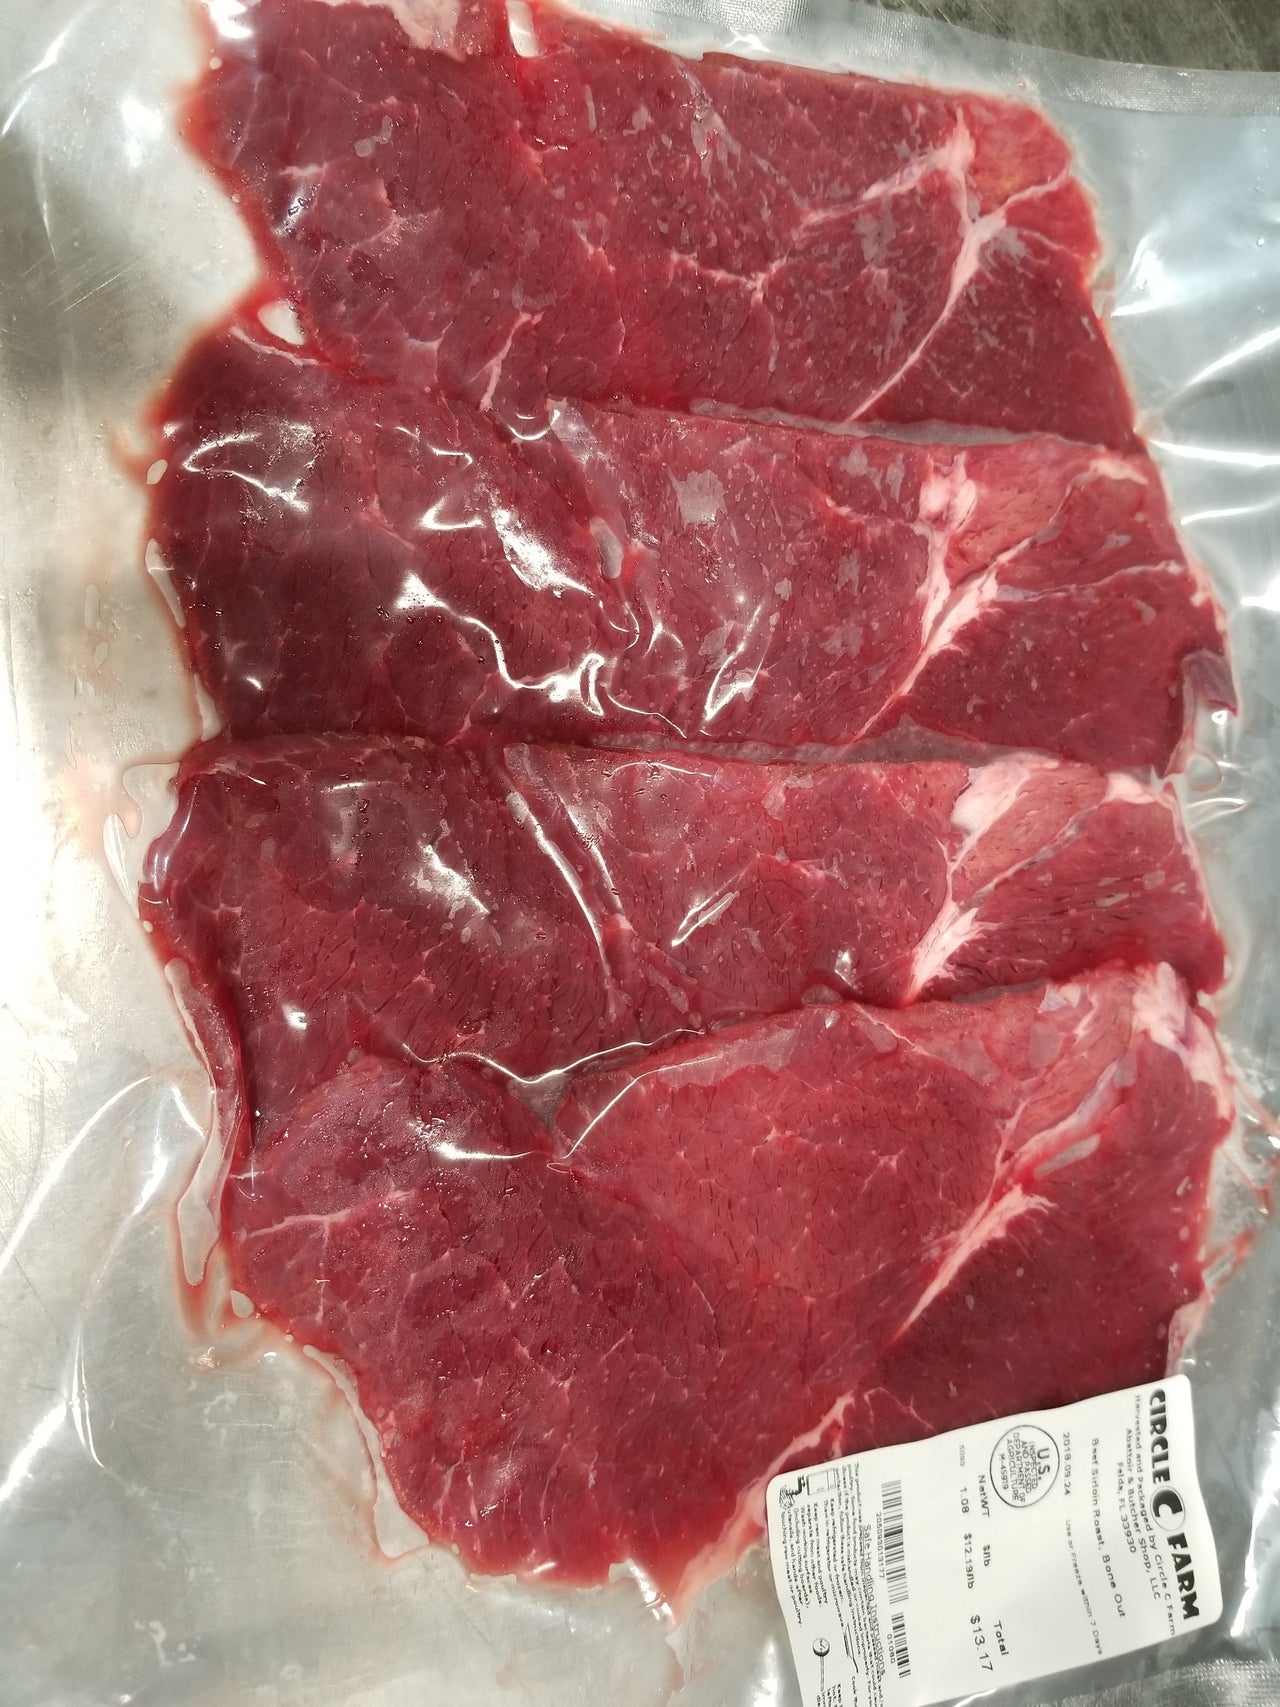 Grass Fed & Grass Finished Beef Sirloin Steak Cutlets, Approx. 1/4" thick - Circle C Farm